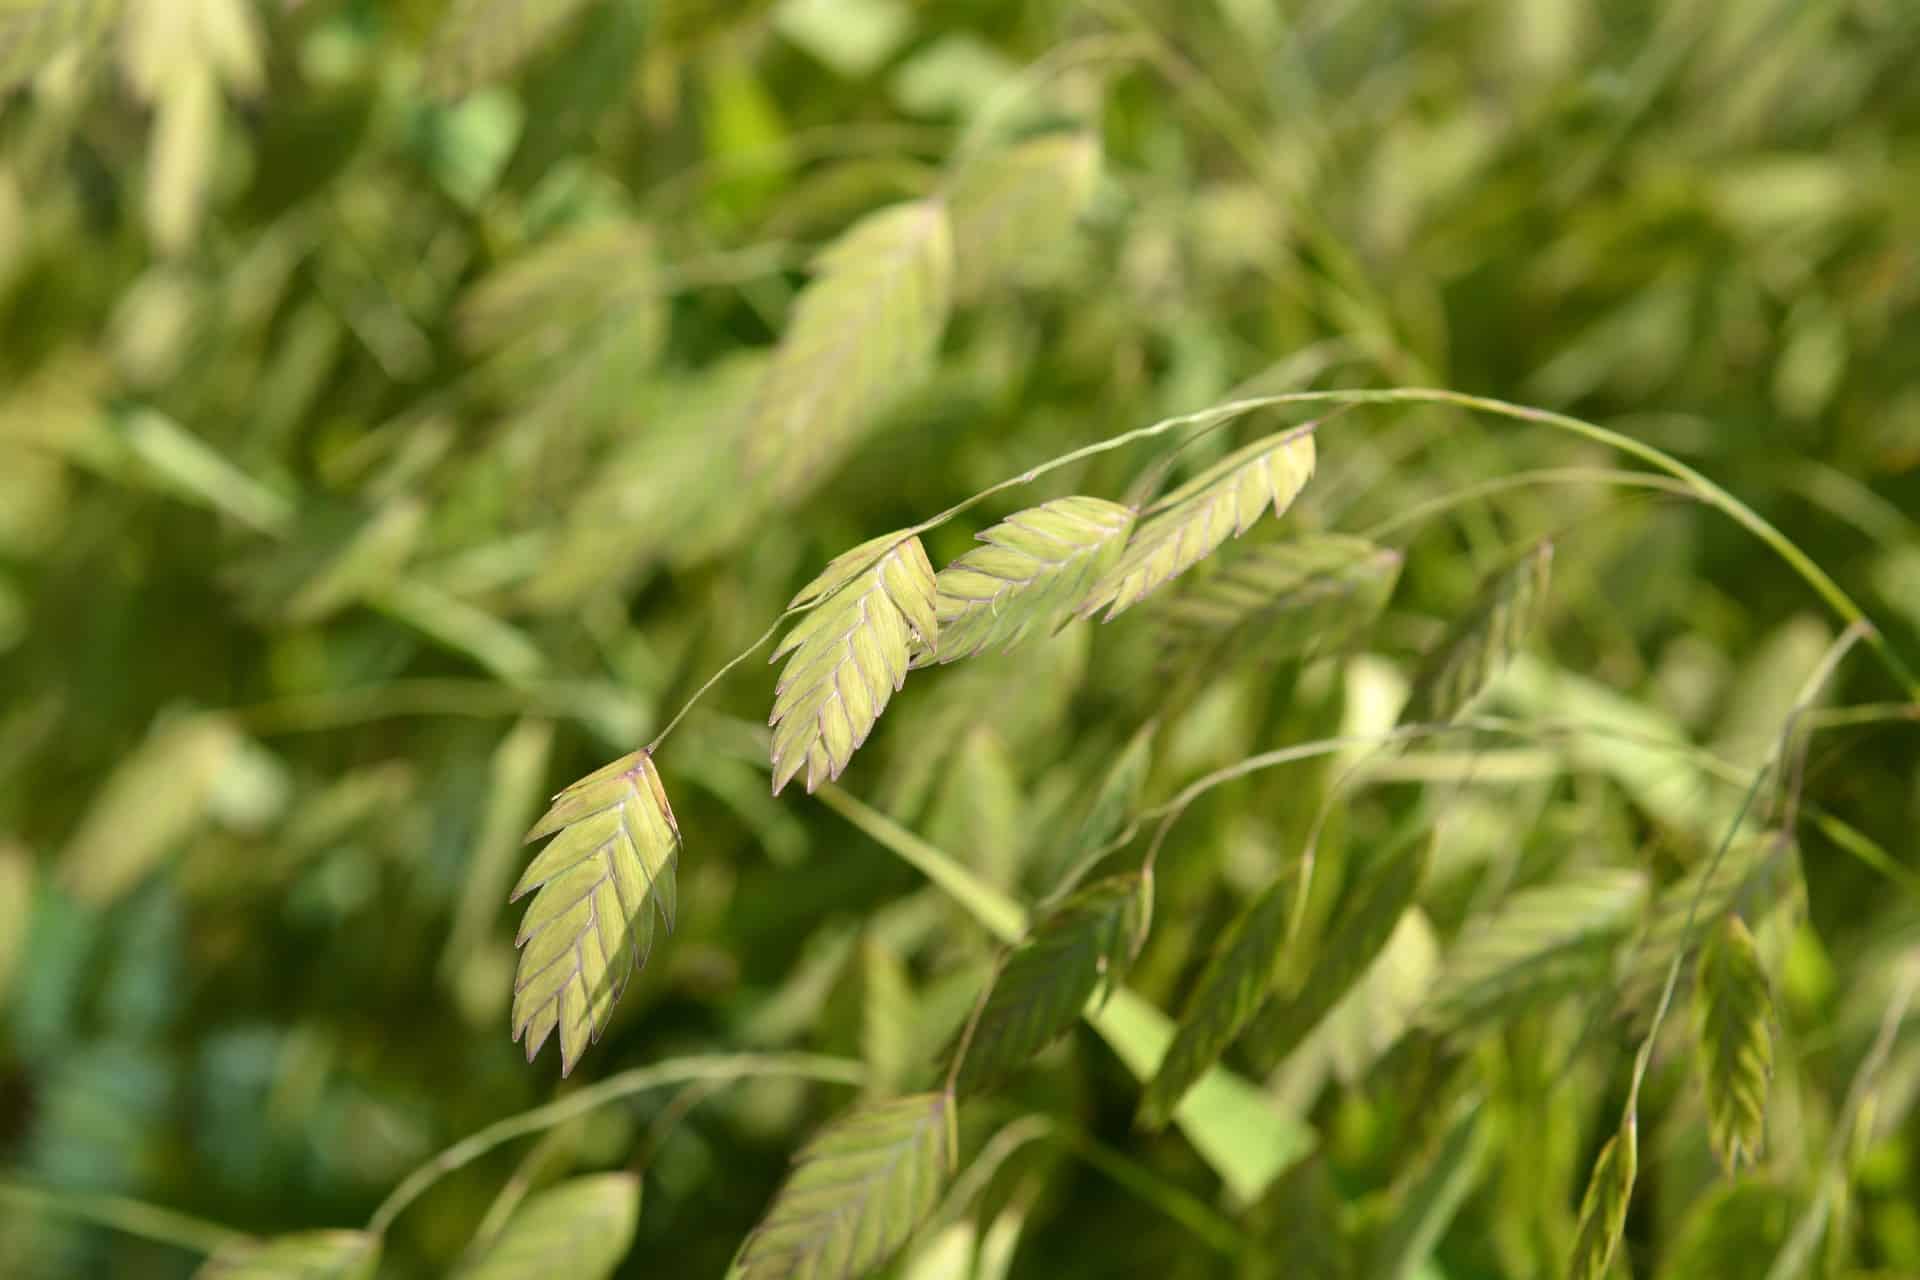 Northern sea oats has attractive spring blooms.